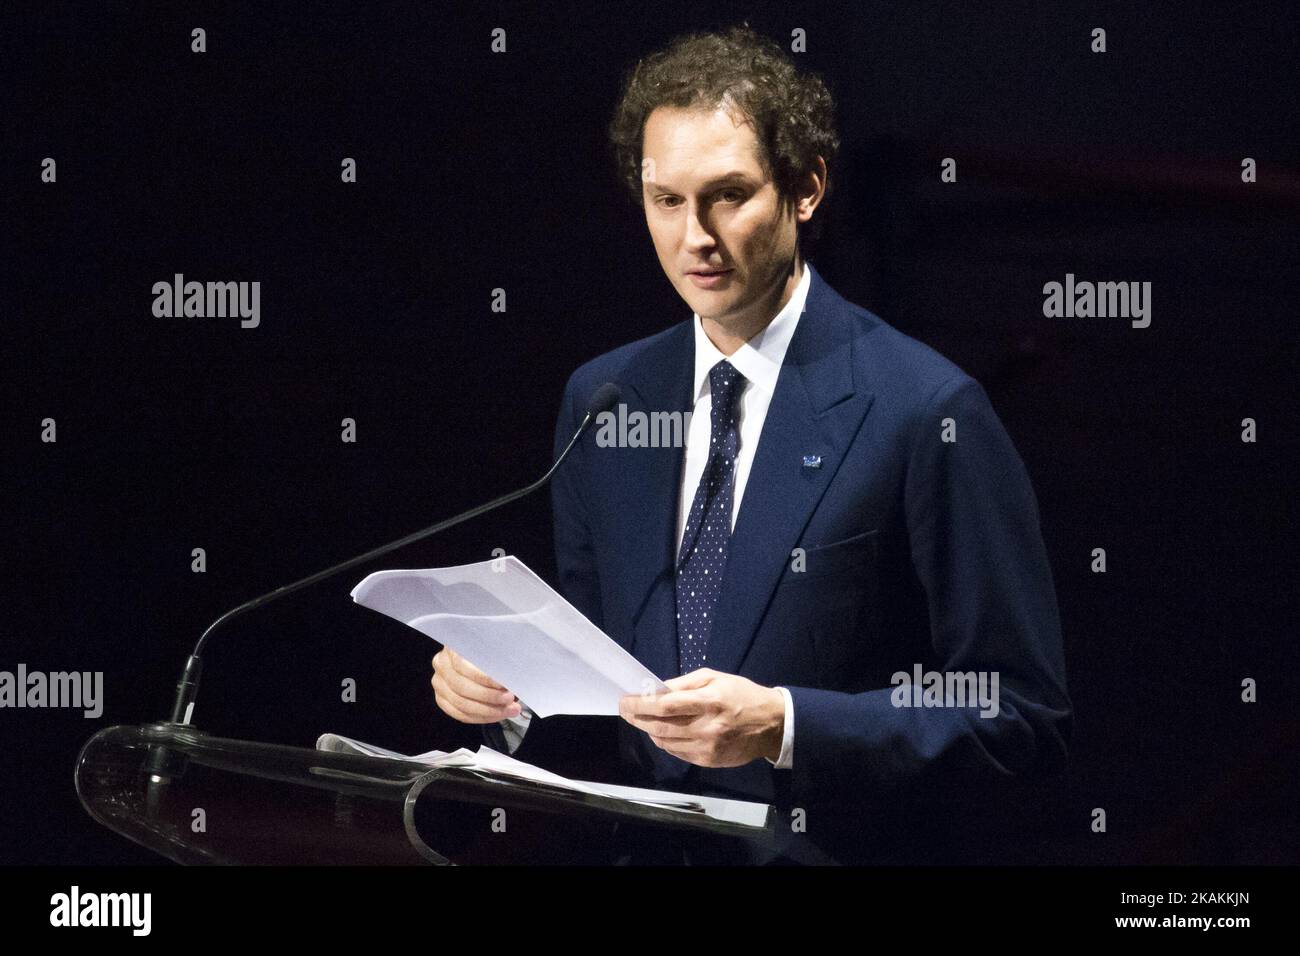 John Elkan the chairman of Editrice La Stampa speaks during the 150th anniversary of foundation of italian newspaper La Stampa at Auditorium Giovanni Agnelli at Lingotto in Turin, Italy on February 9, 2017. At the event were present many celebrities in particular the Italian president Sergio Mattarella, John Elkann and Sergio Marchionne. (Photo by Mauro Ujetto/NurPhoto) *** Please Use Credit from Credit Field *** Stock Photo